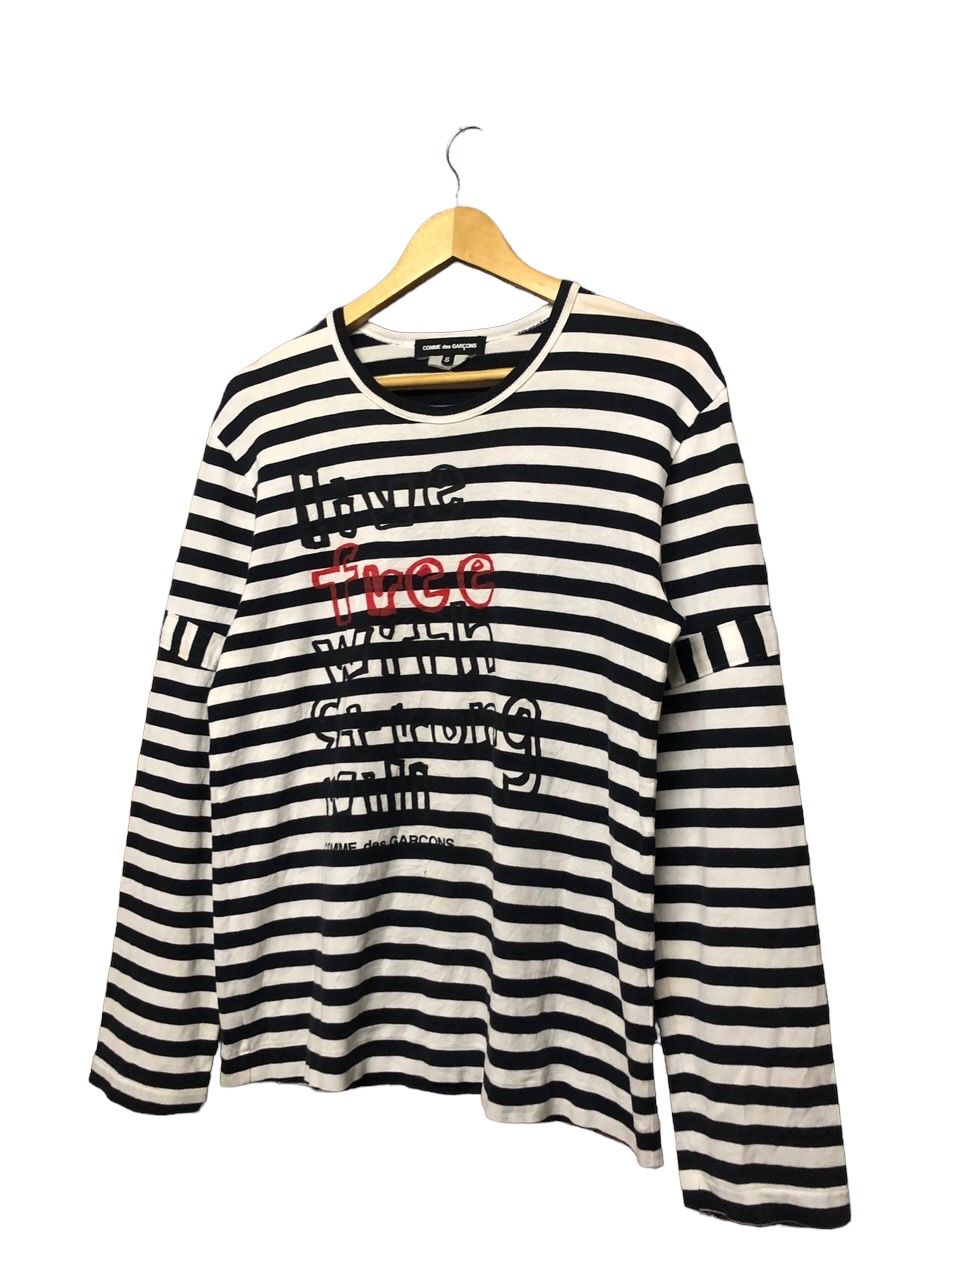 Rare🔥Cdg Poem *Live Free With Strong Wili*Striped Tee - 5